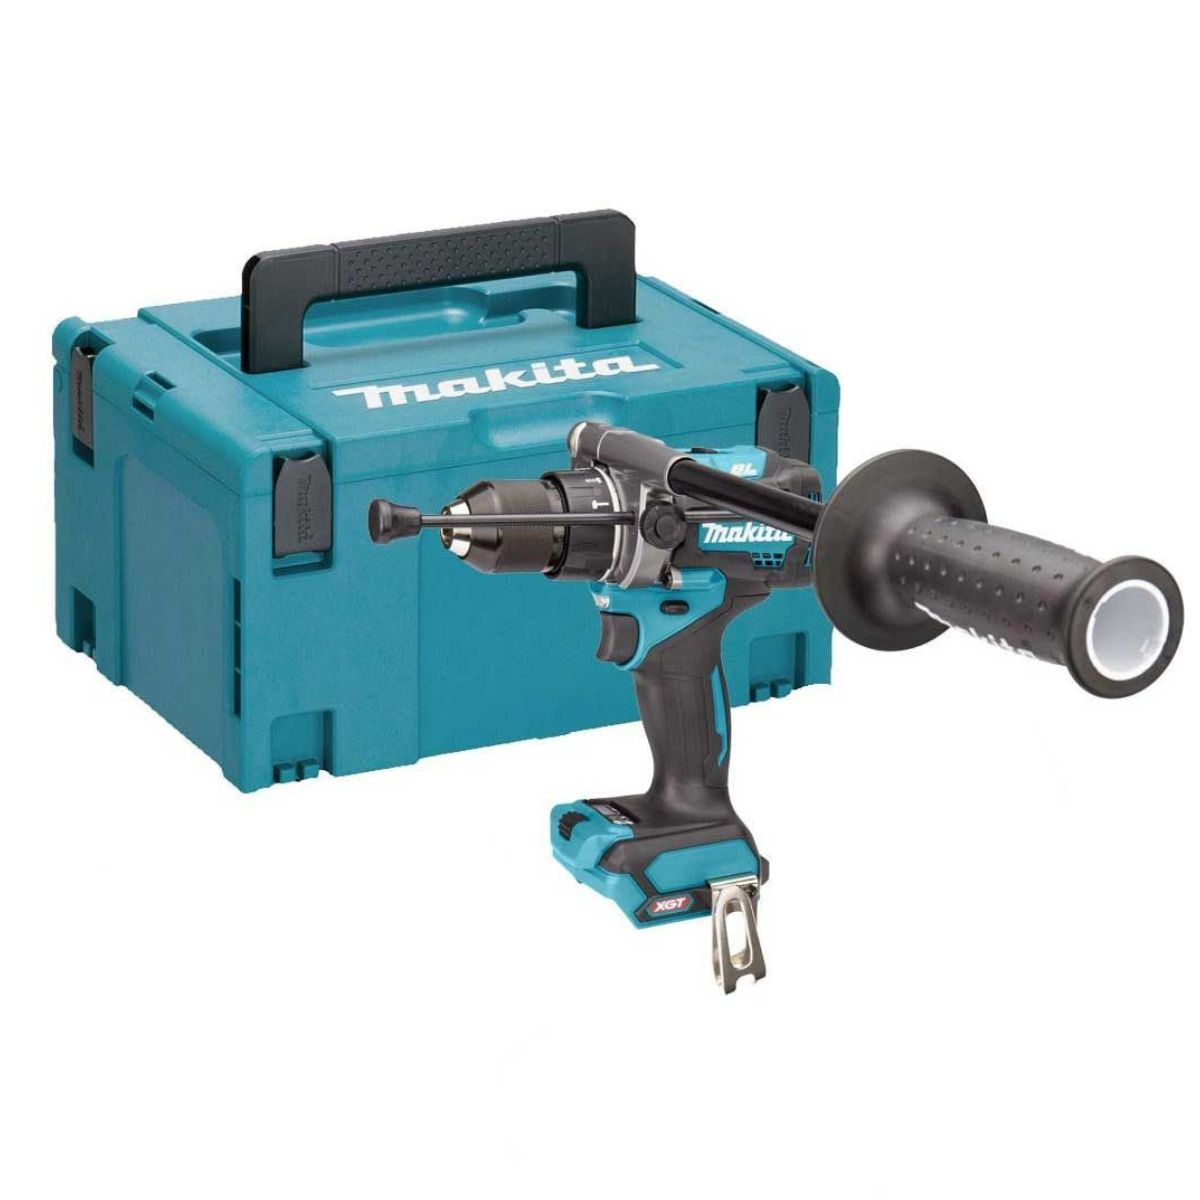 Makita HP001GZ01 40v max XGT Brushless Combi Drill Body Only with Case